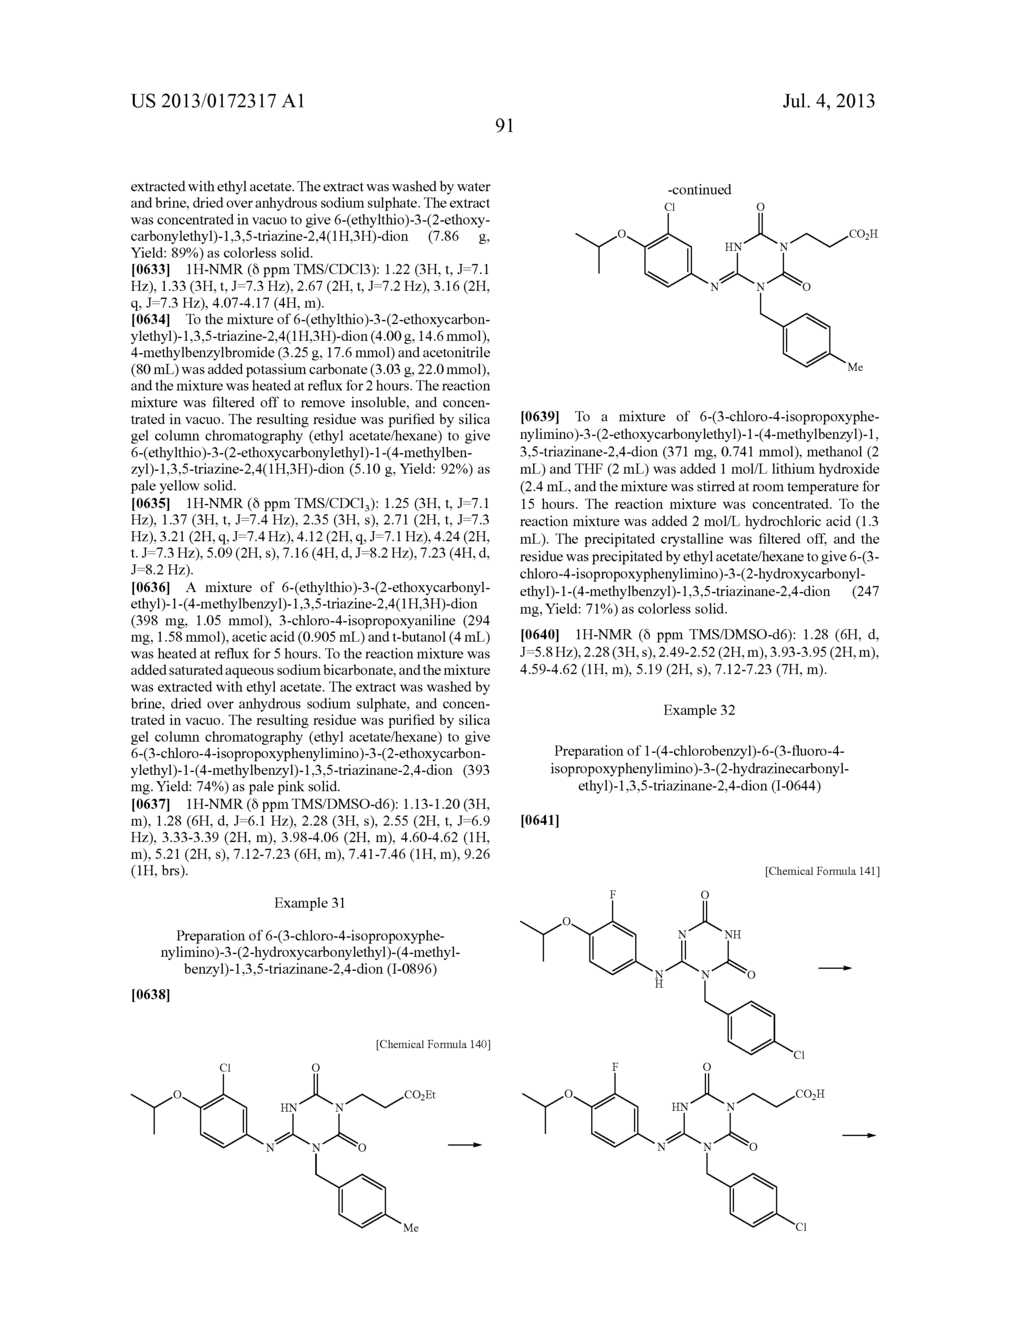 TRIAZINE DERIVATIVE AND PHARMACEUTICAL COMPOSITION HAVING AN ANALGESIC     ACTIVITY COMPRISING THE SAME - diagram, schematic, and image 92